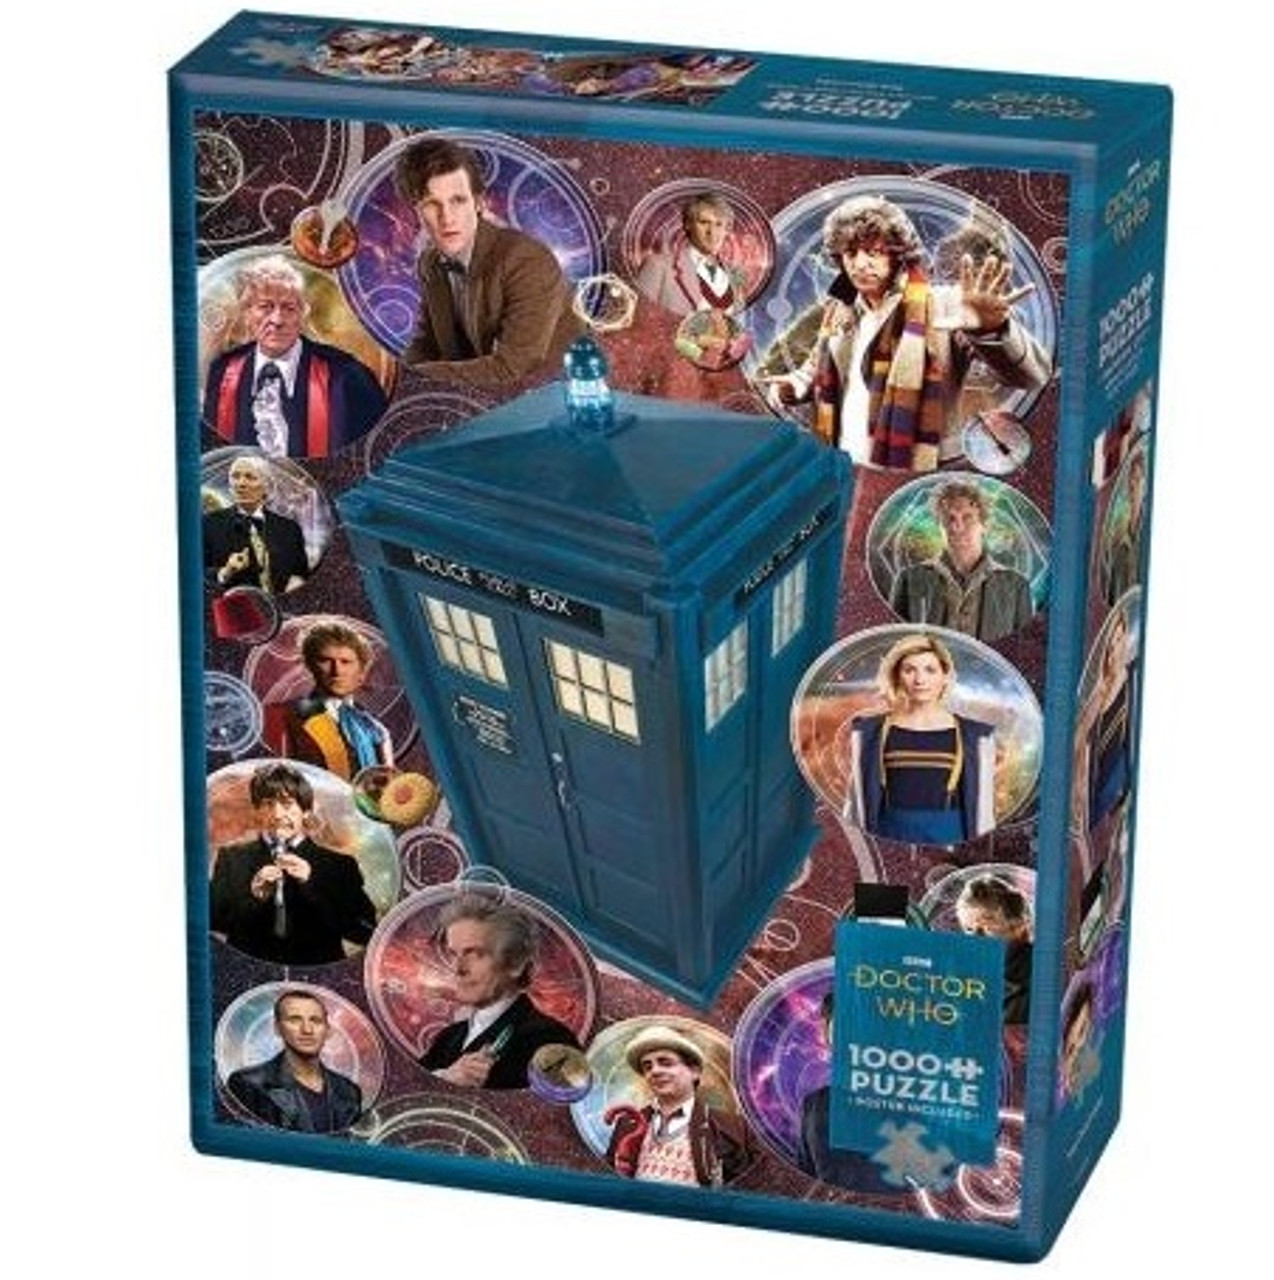 13 Doctors of Doctor Who Jigsaw Puzzle by Cobble Hill | RetroFestive.ca